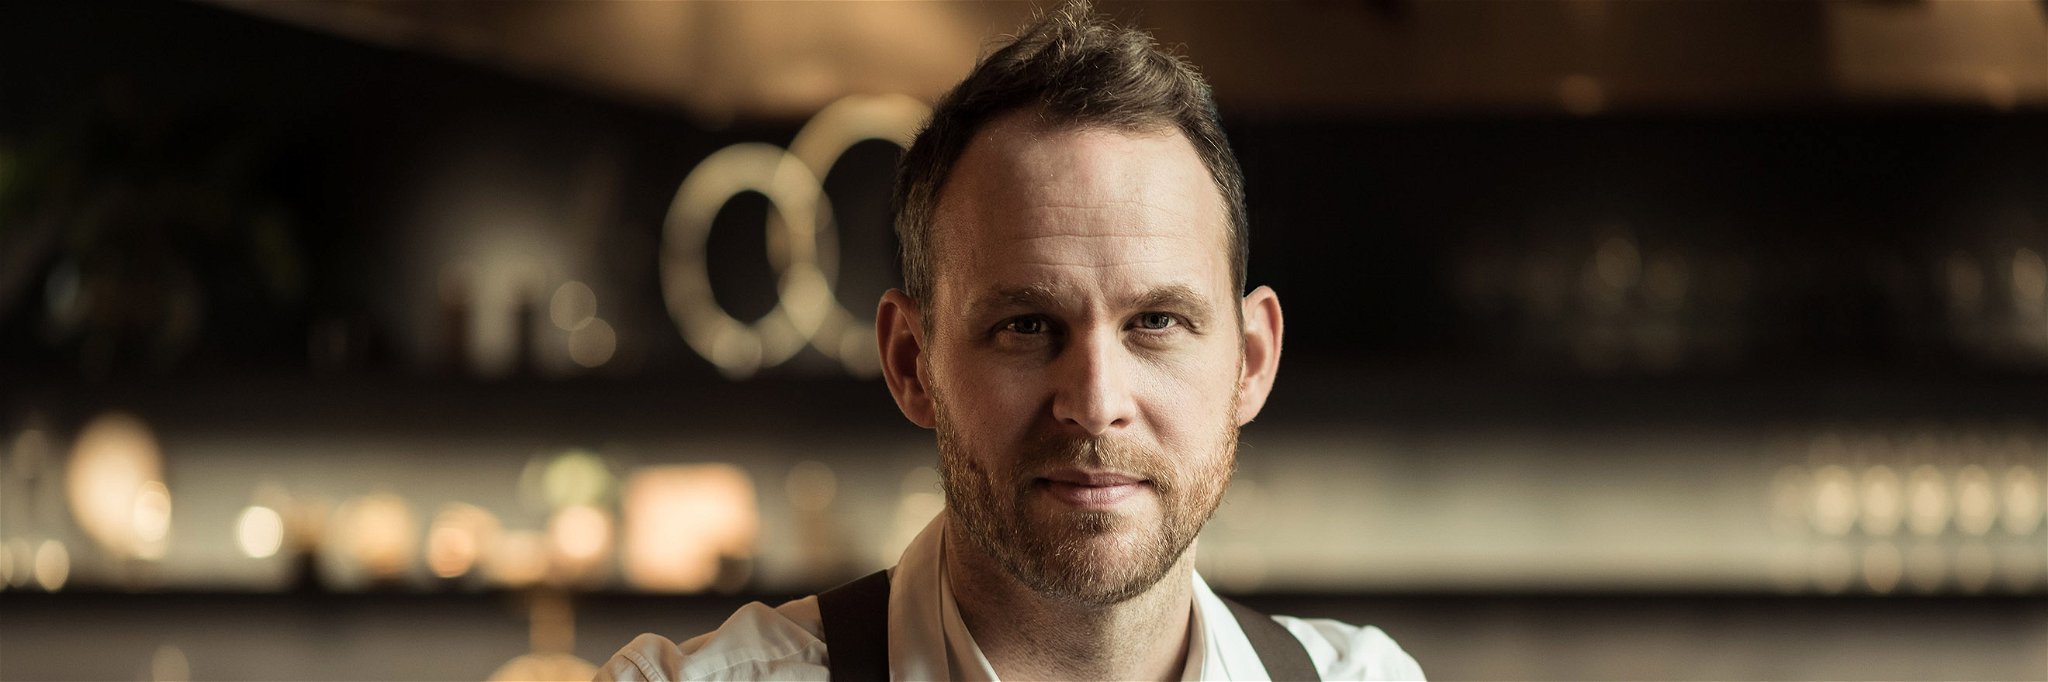 Björn Frantzén is one of the best chefs in the world and runs two three-star restaurants.